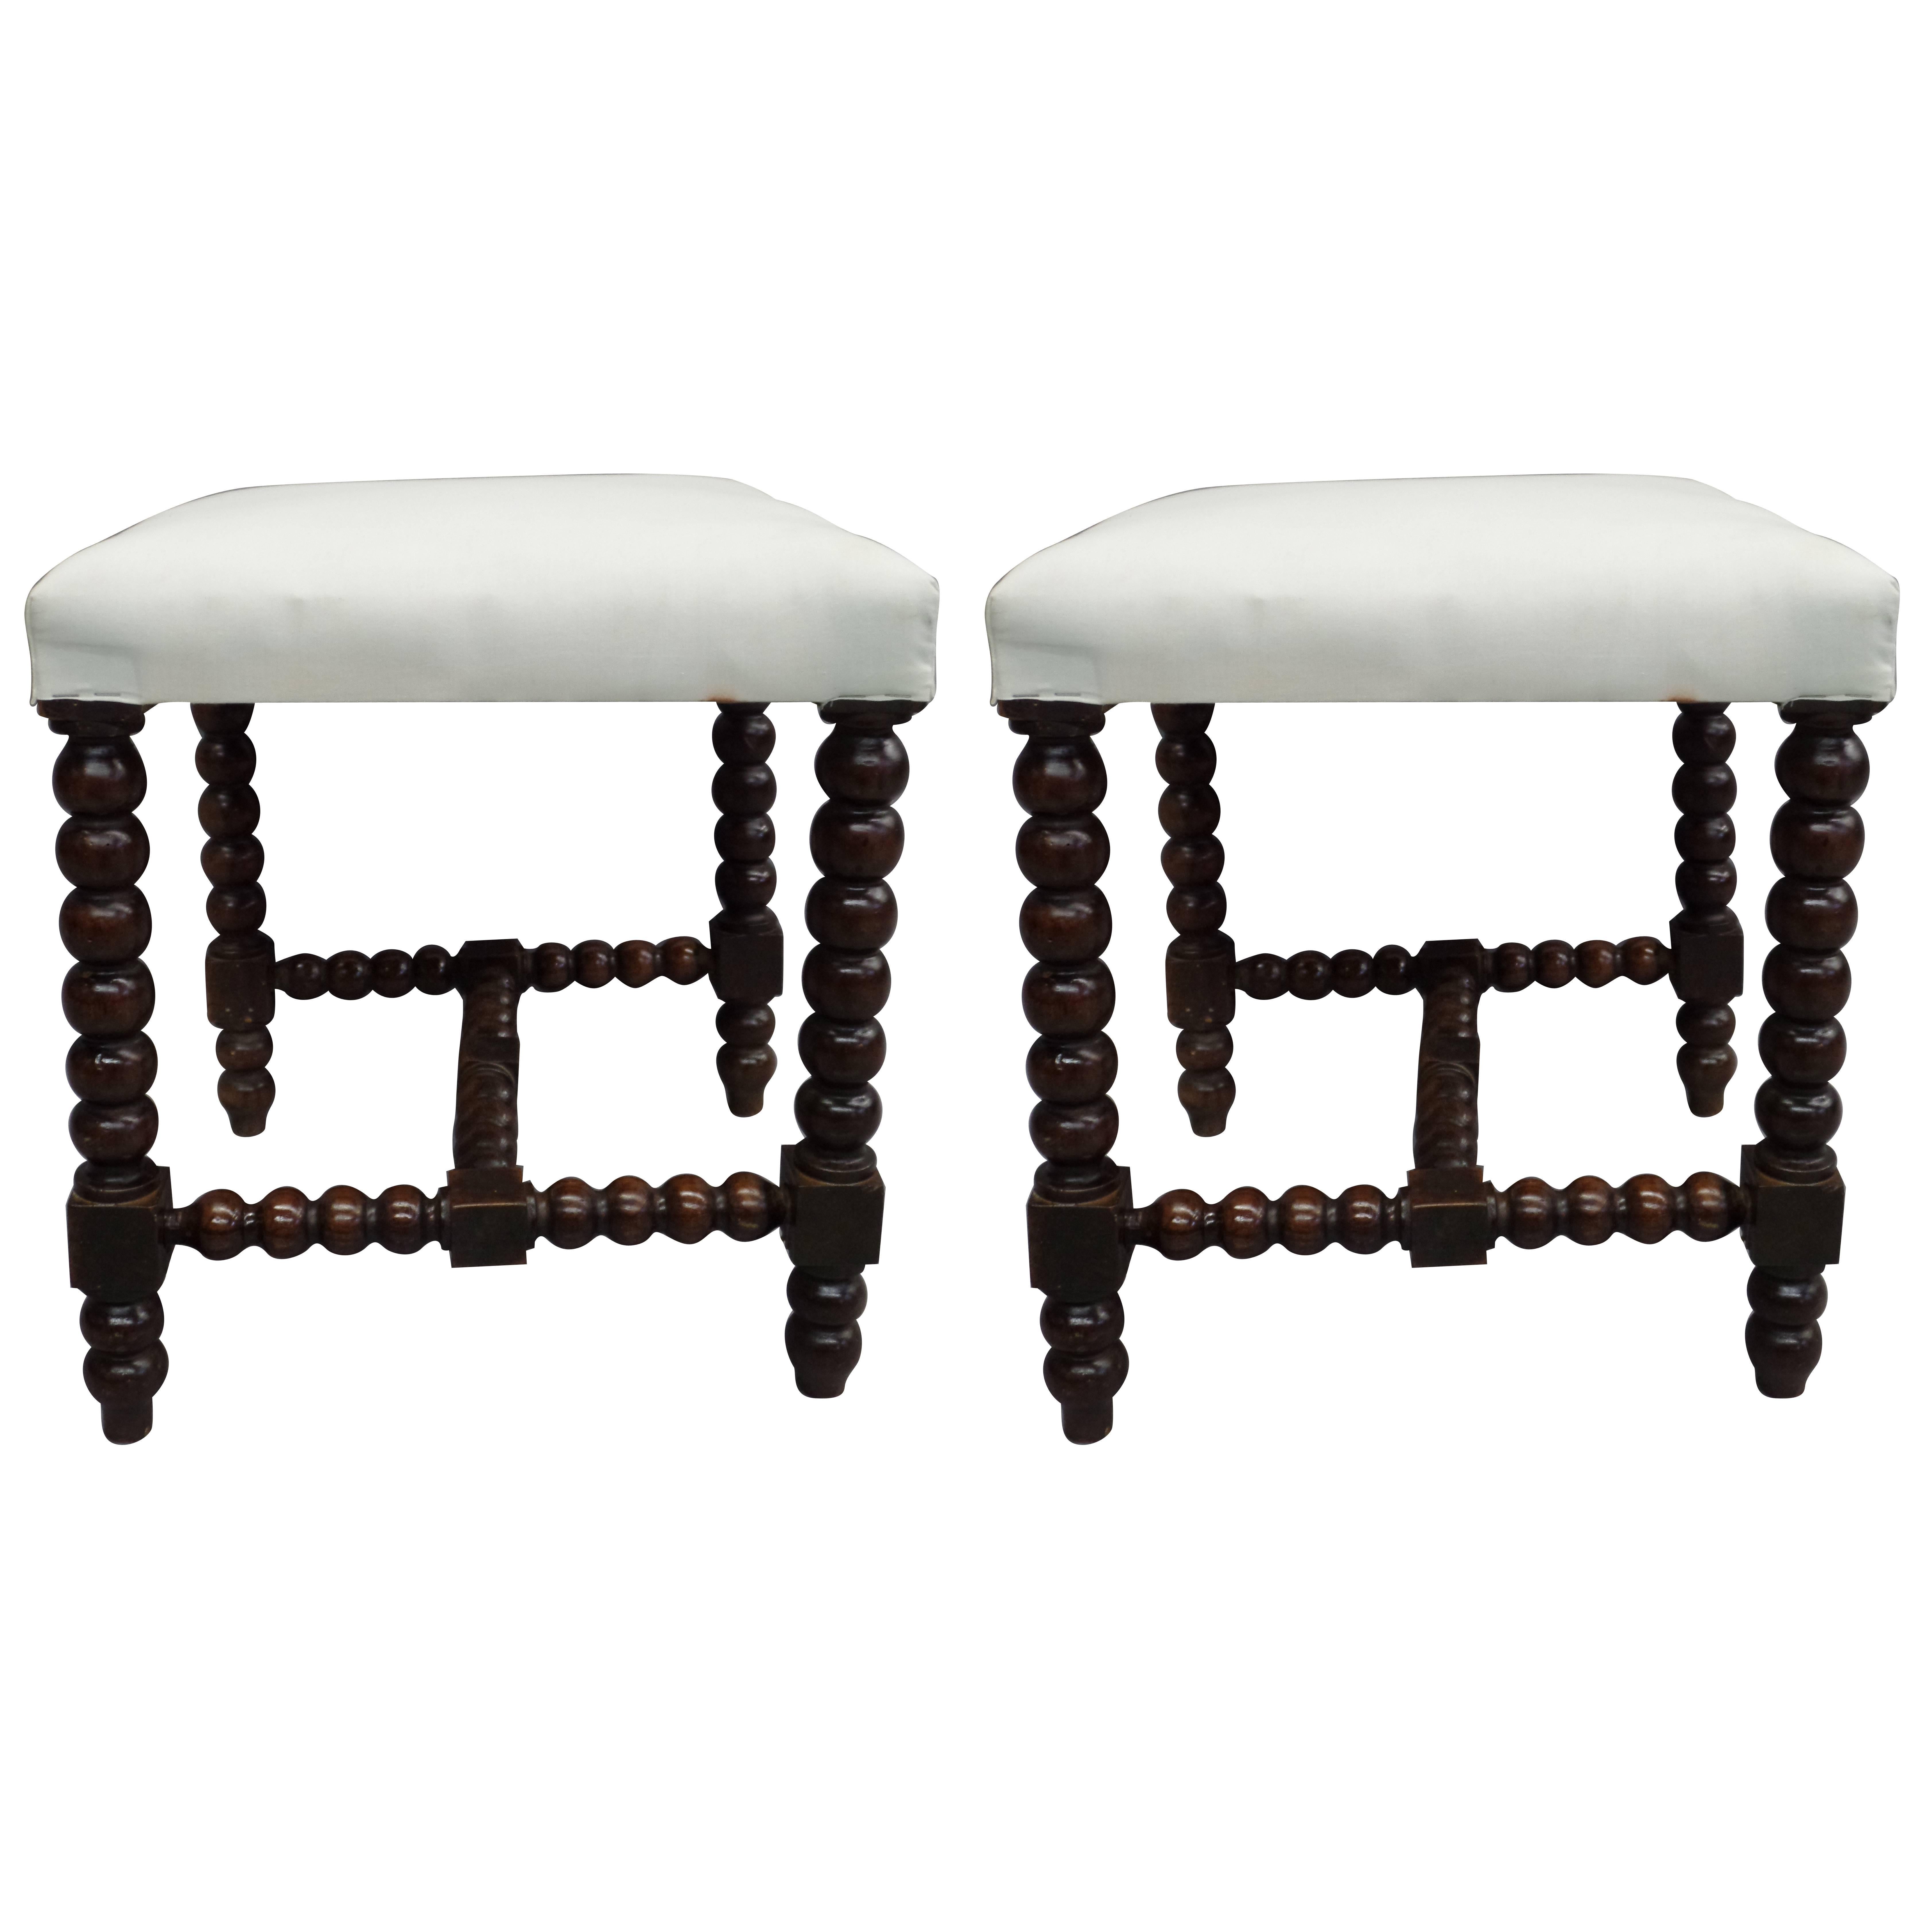 Pair French Modern Neoclassical Hand-Carved Wood Stacked Ball Benches / Stools For Sale